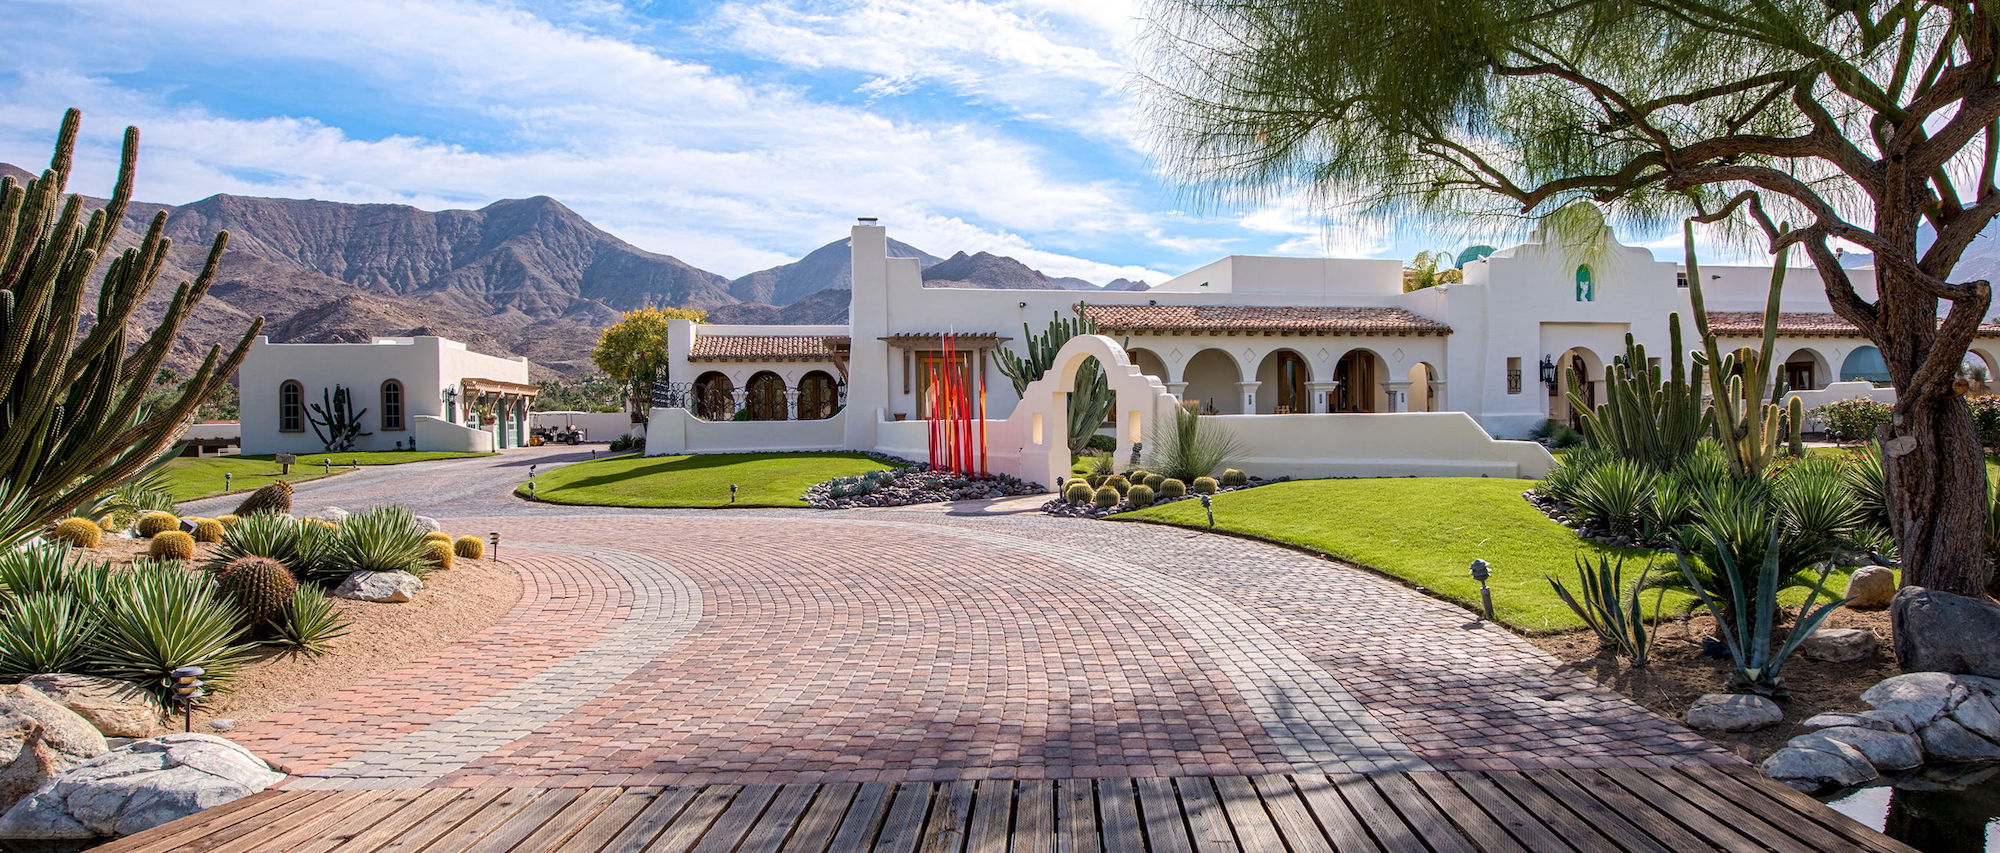 The Pond Estate in Palm Springs is a 12-acre property set against the drama of a desert oasis with a mountainous backdrop